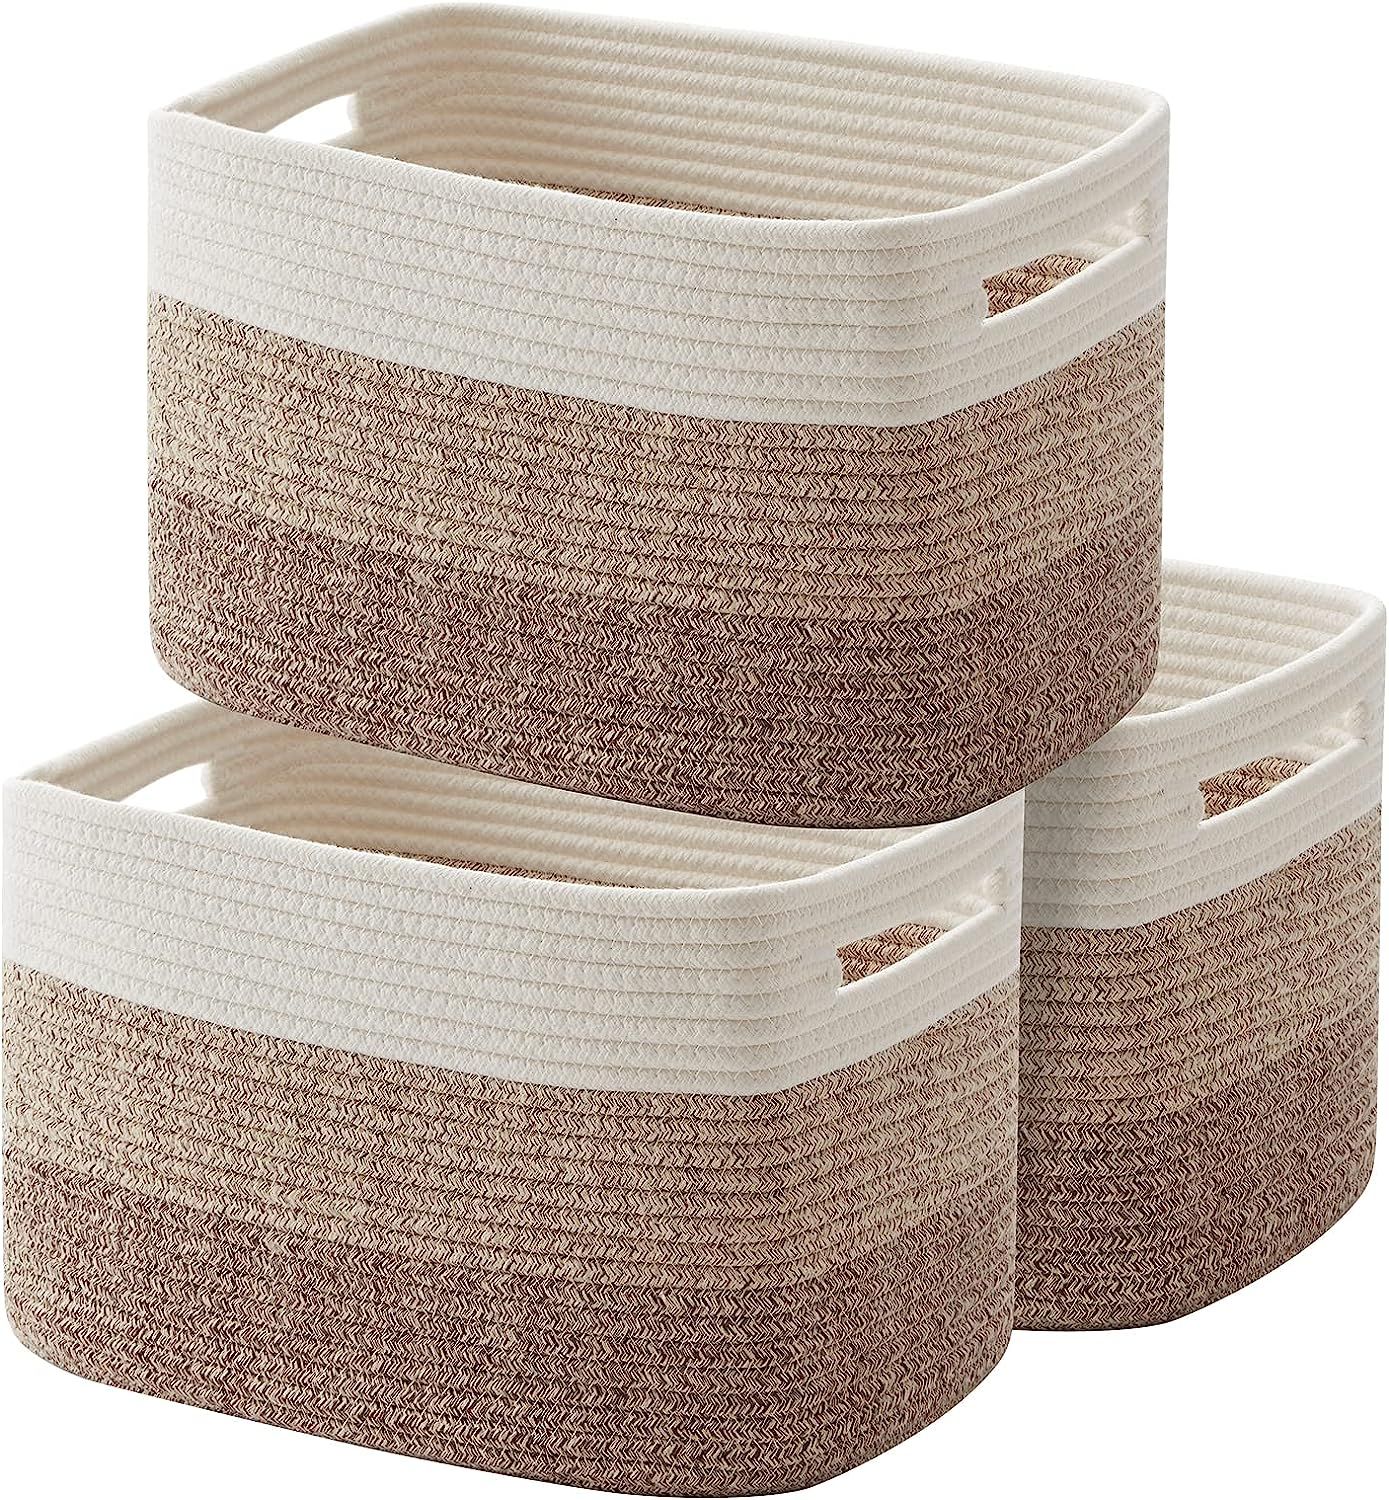 OIAHOMY Storage Basket, Woven Baskets for Storage, Cotton Rope Basket for toys,Towel Baskets for ... | Amazon (US)